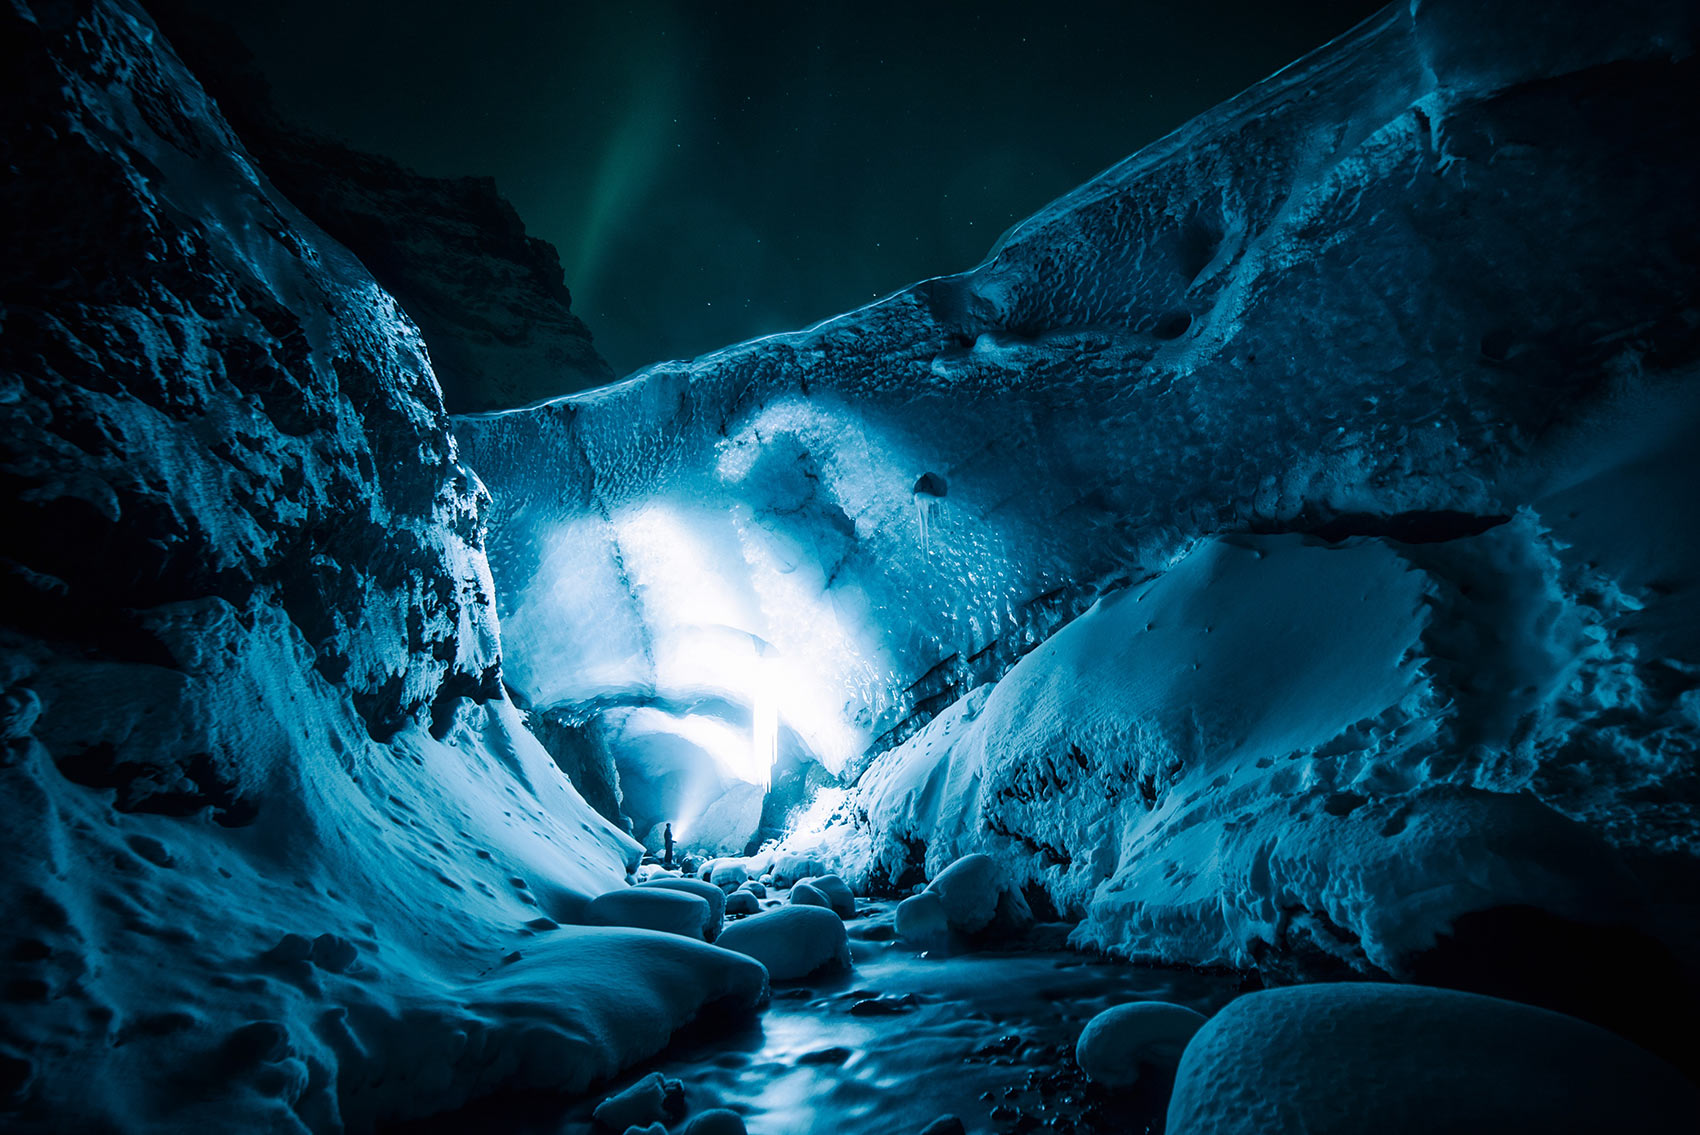 Explore the Great Ice Caverns